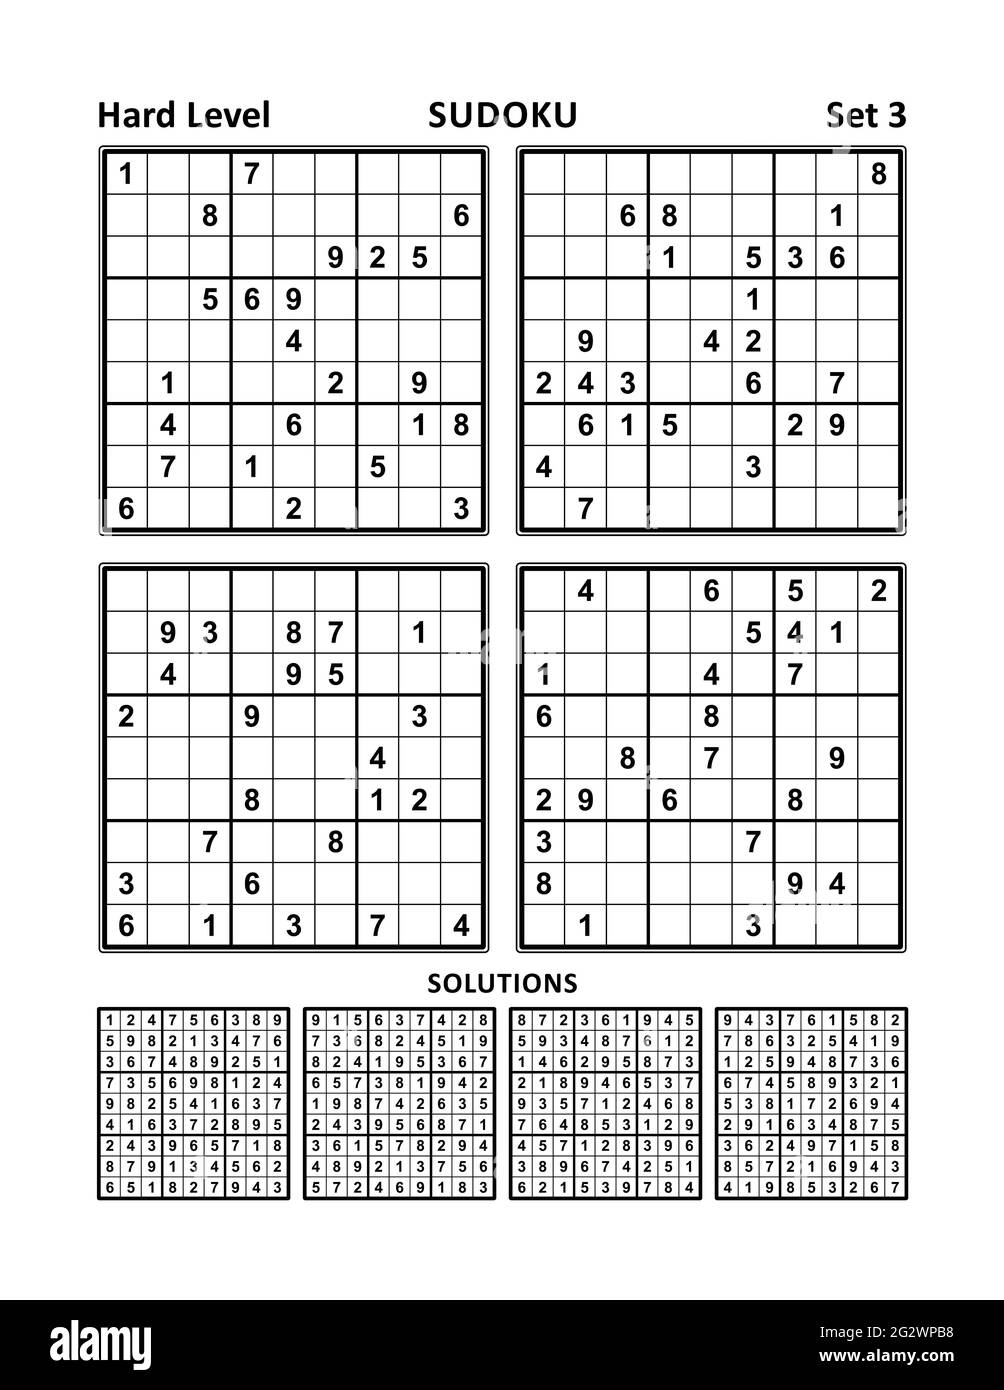 Four sudoku games of hard level, with answers. Set 3. Stock Photo